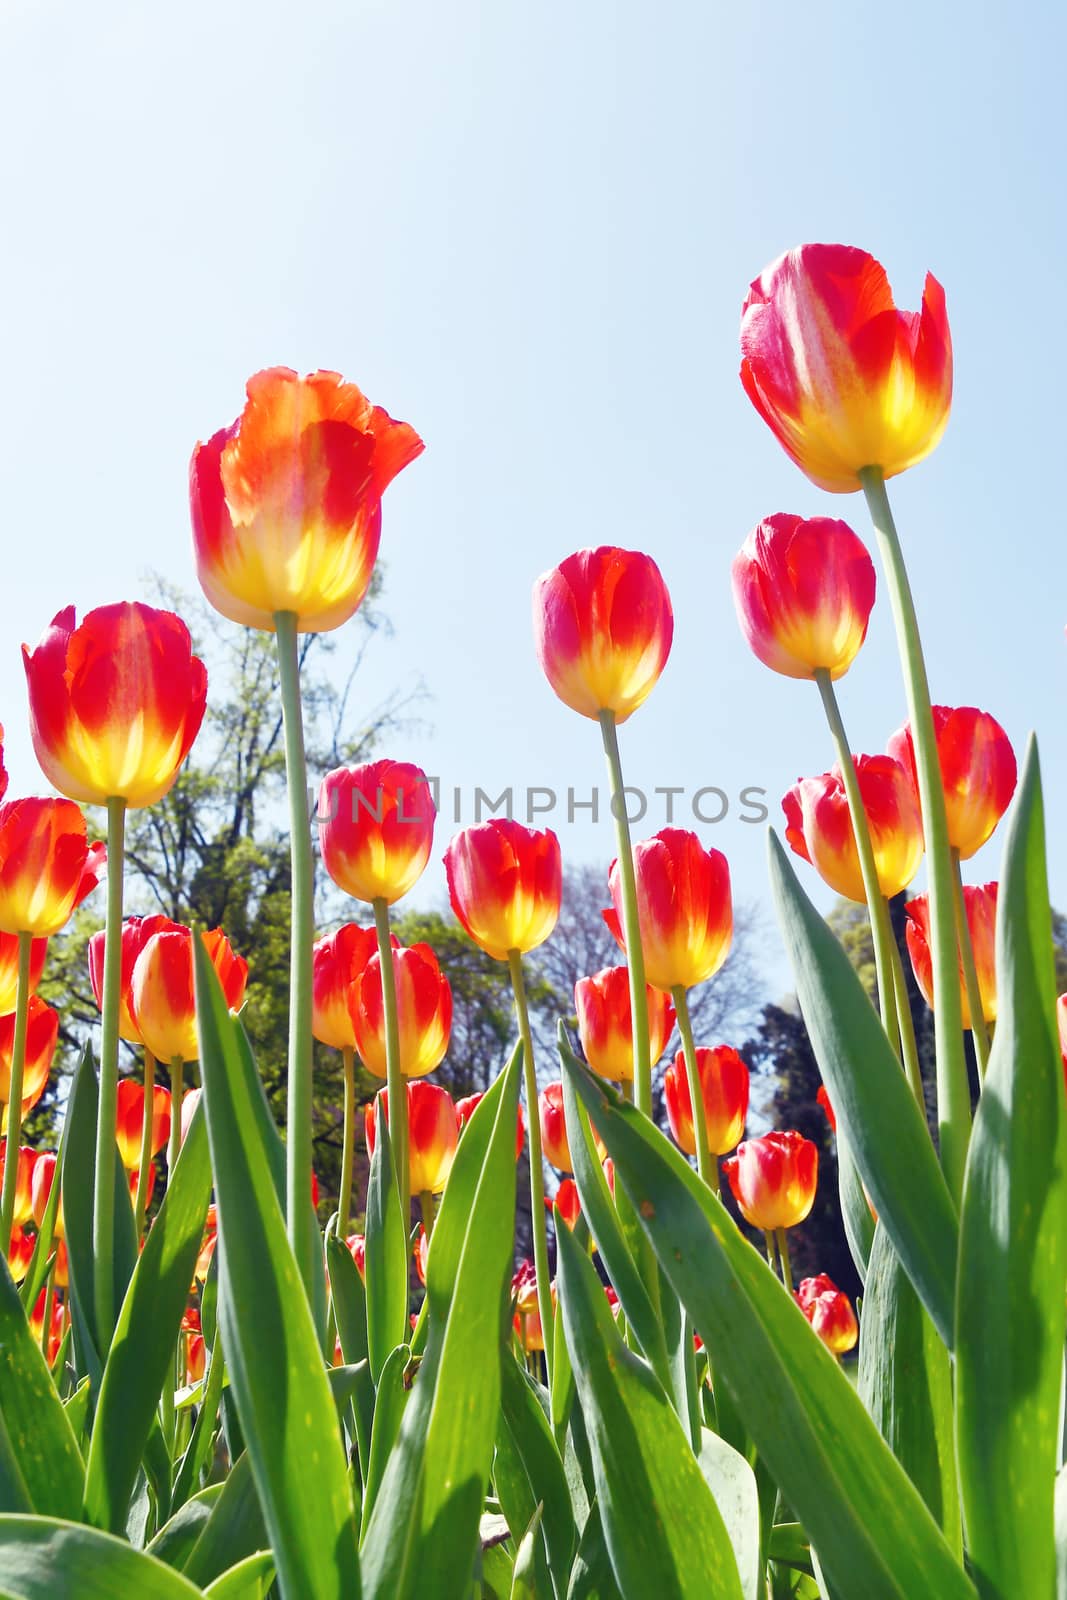 Tulips in the flowerbed. by bongia